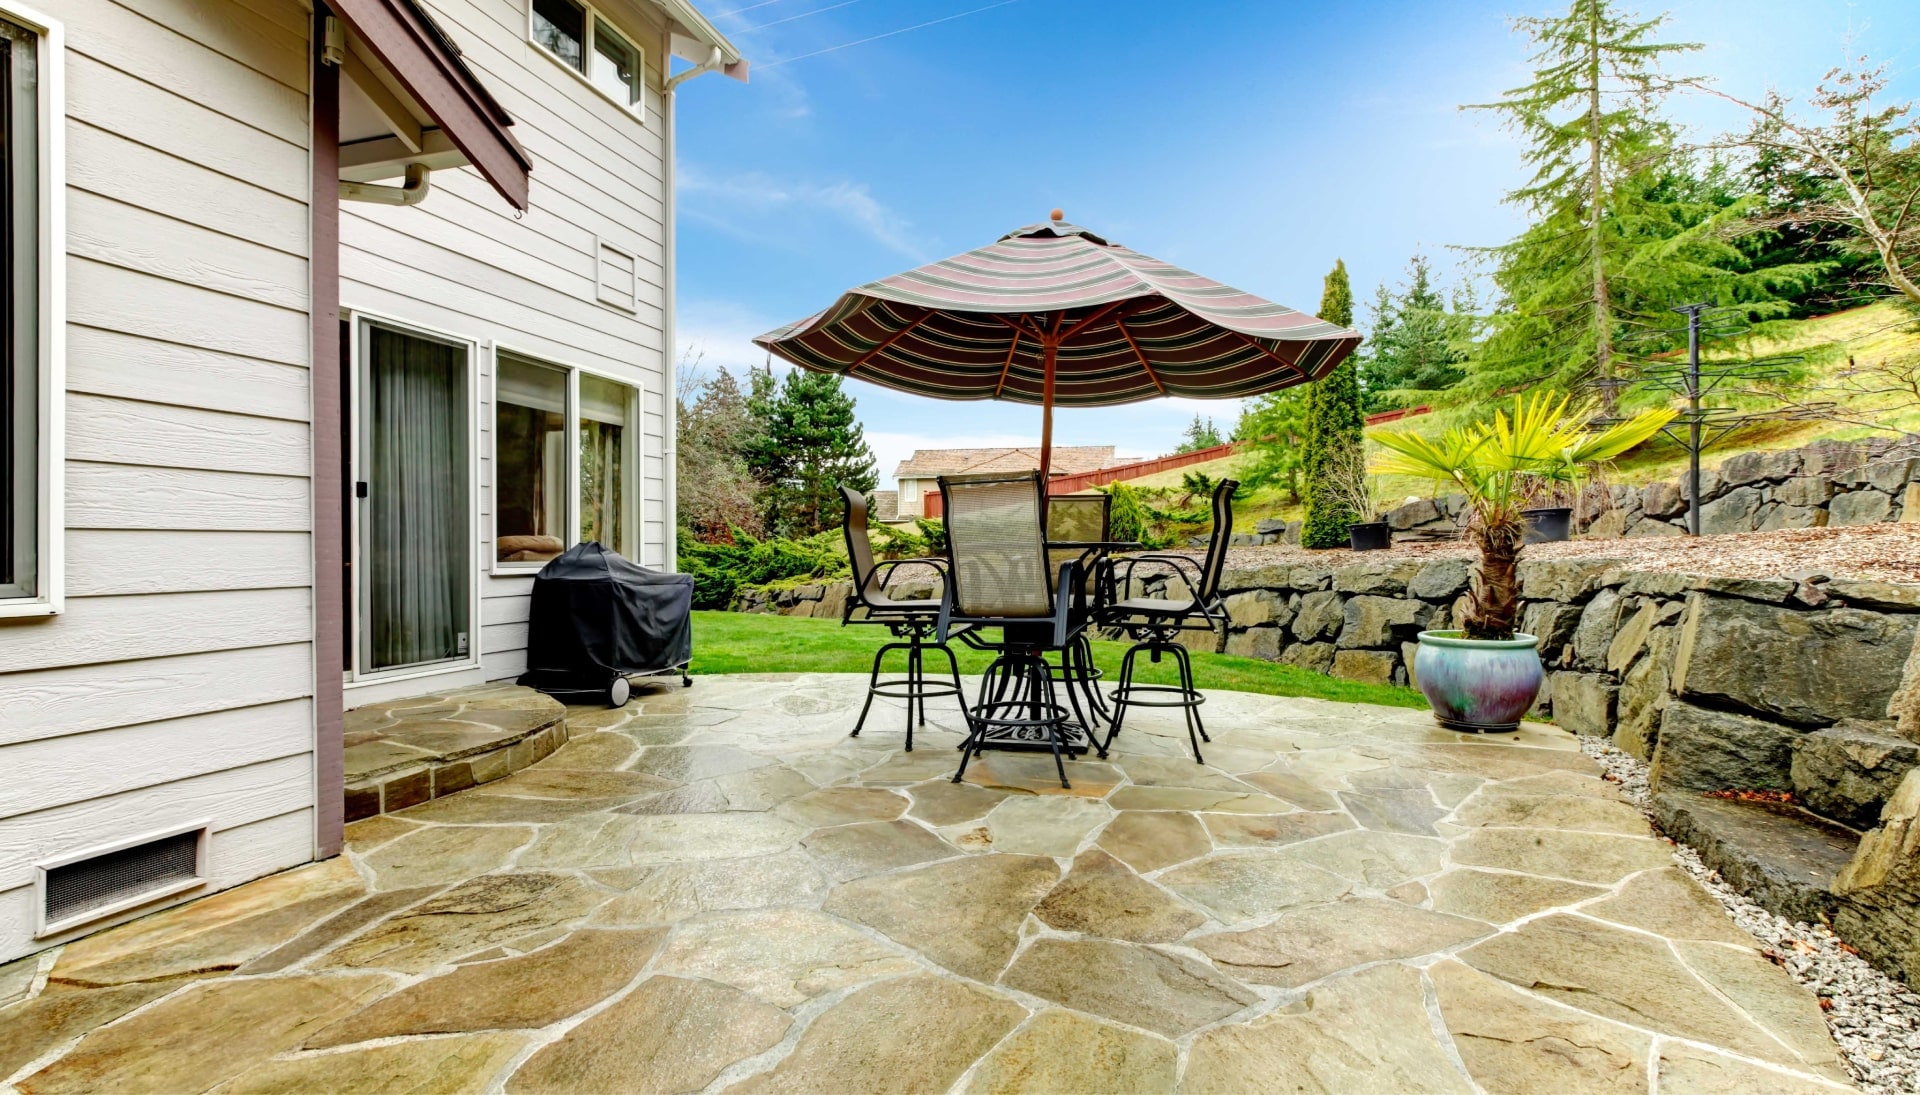 Beautifully Textured and Patterned Concrete Patios in Reno, Nevada area!